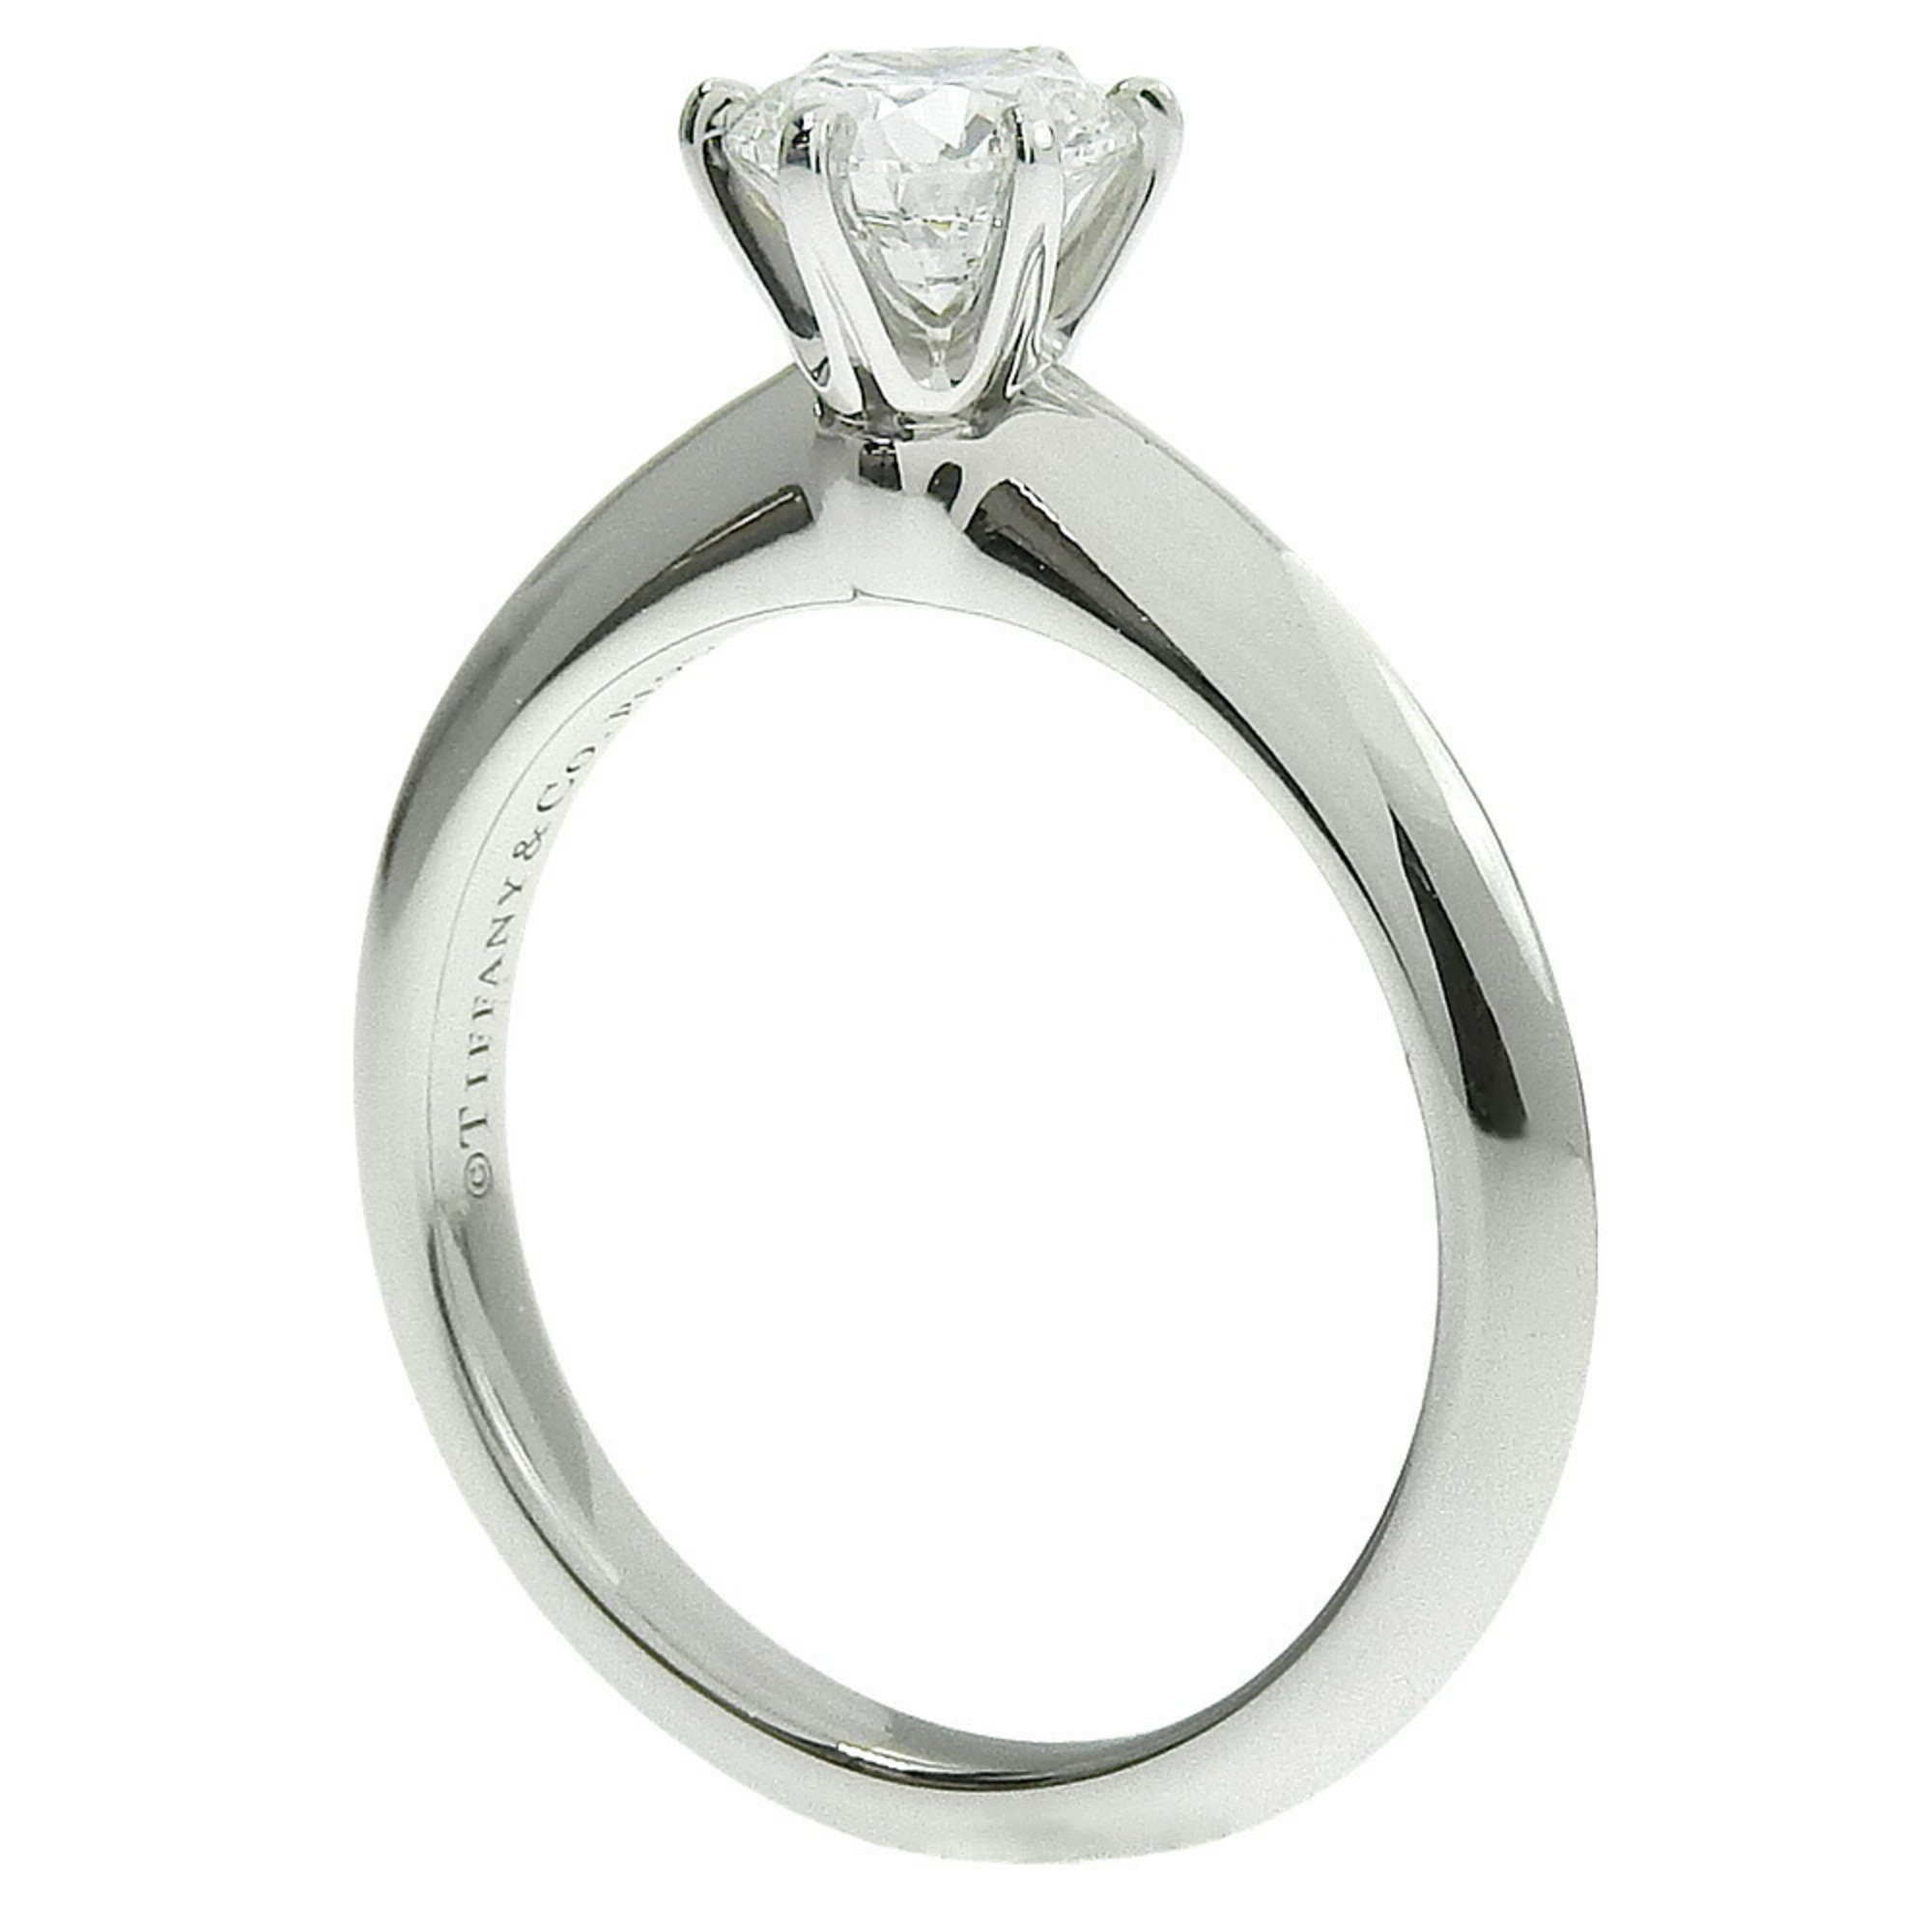 Tiffany & Co. Solitaire size 6 ring, Pt950 platinum x diamond, 0.54, approx. 4.2g, Solitaire, women's S